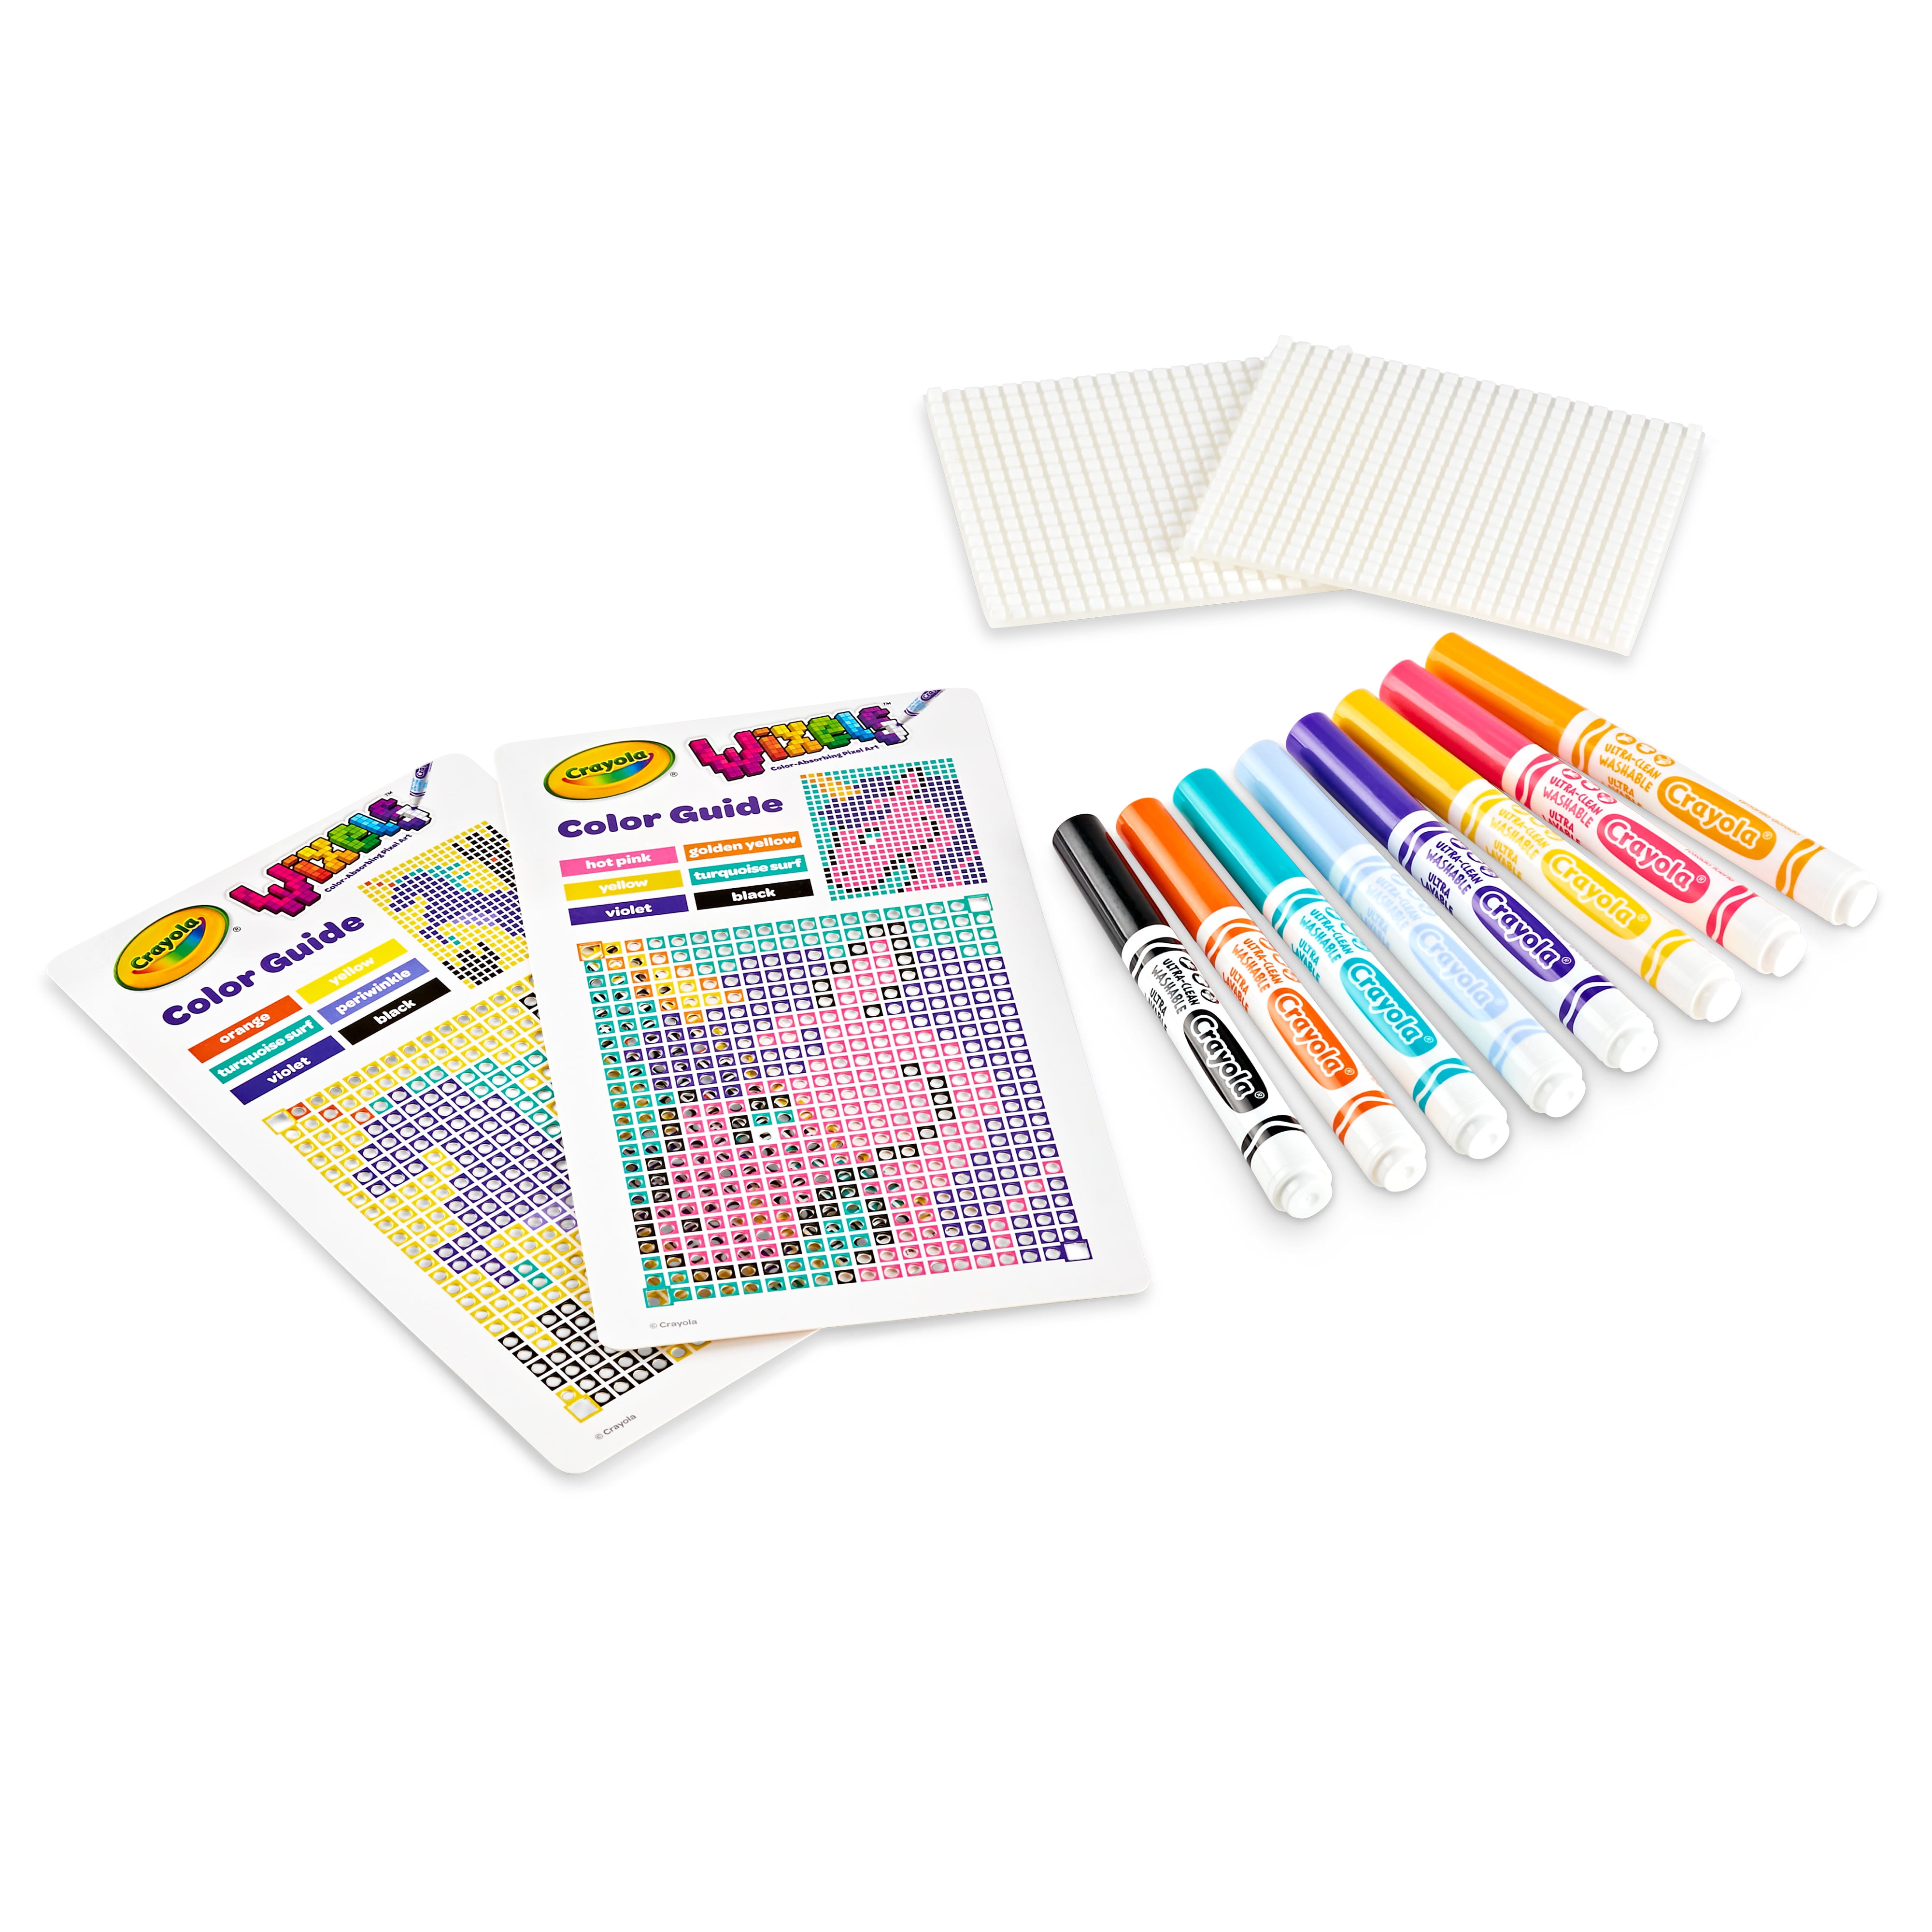 Crayola on Instagram: 🦄 Crayola Wixels is a fun, innovative way for kids  to create colorful pixel art while inspiring their imagination and  creativity. When coloring, capillary action allows marker ink to